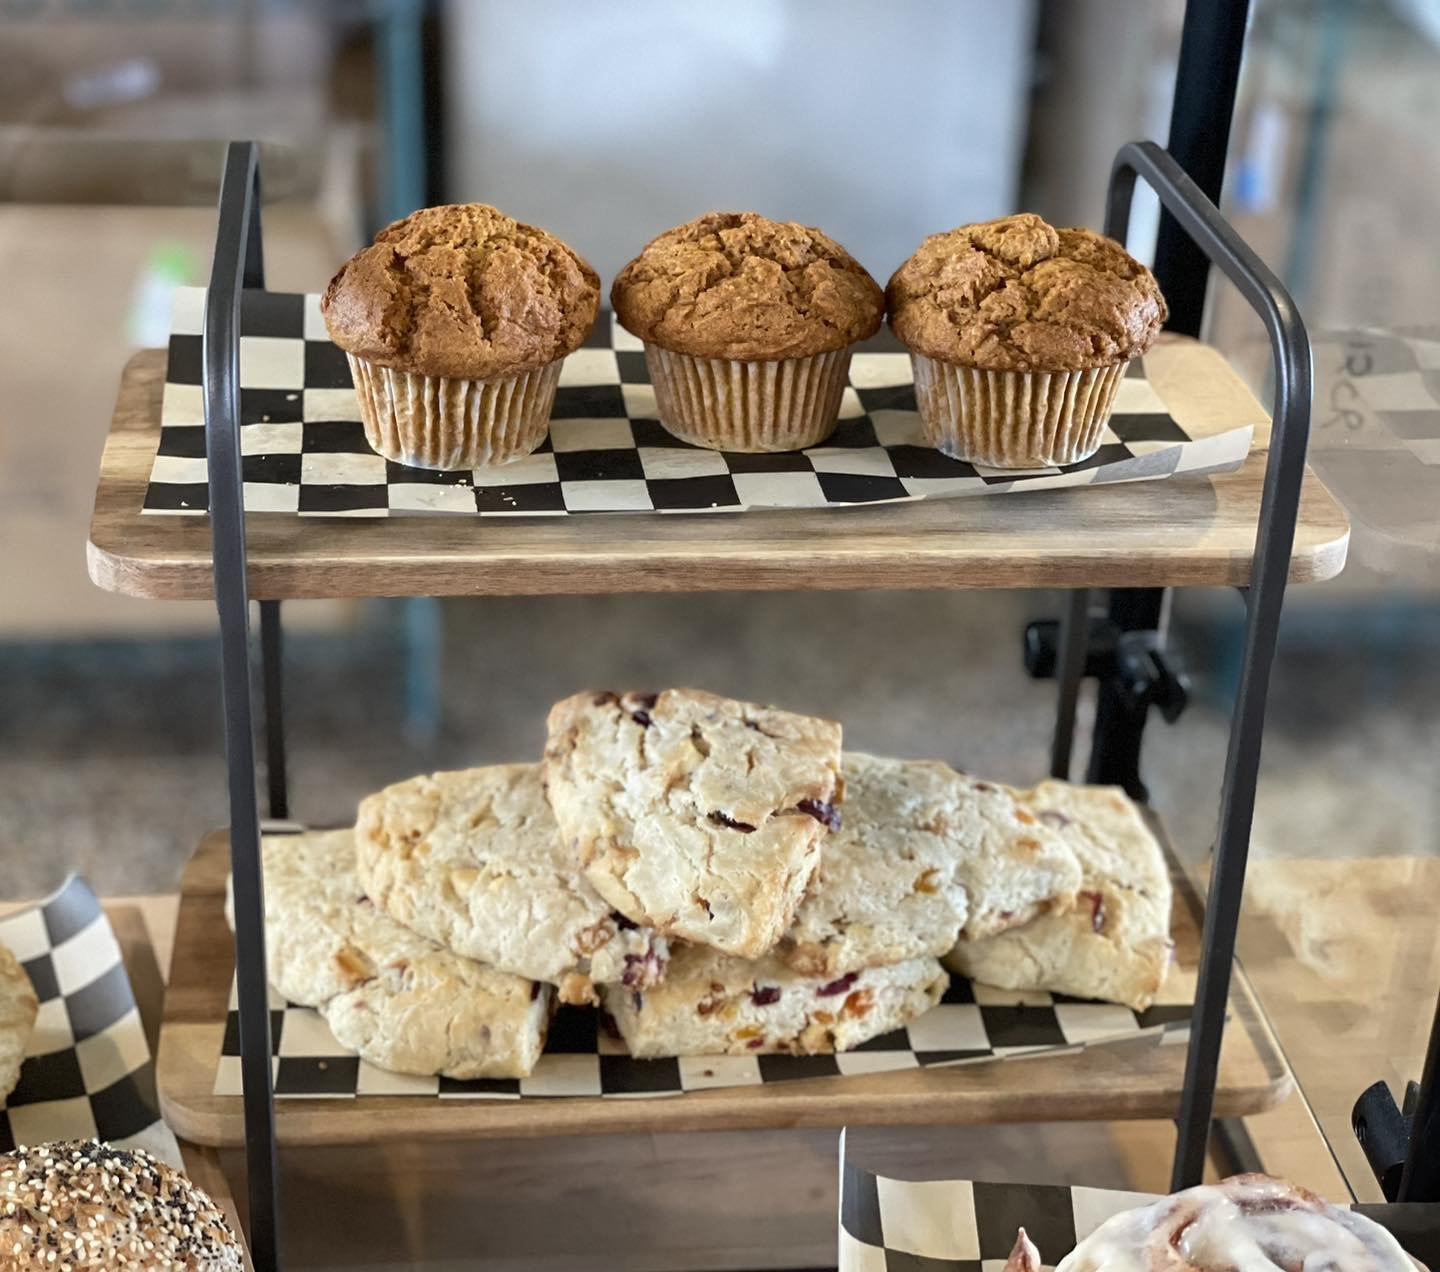 Muffins or Scones?
Tough choices&hellip;

We say, why not both? 😋